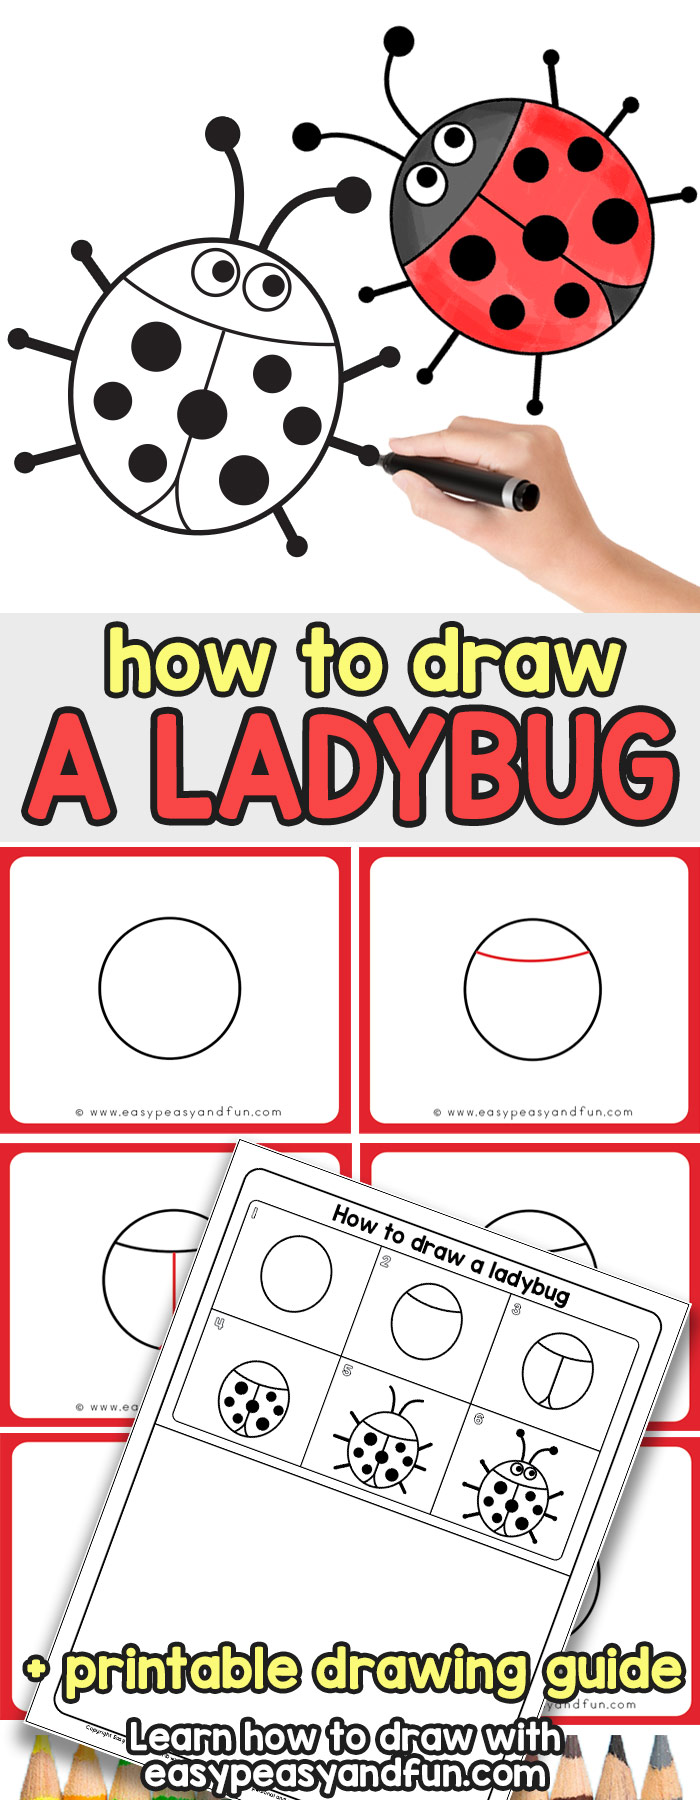 Learn How to Draw a Ladybug - Simple Step by Step Tutorial for Kids